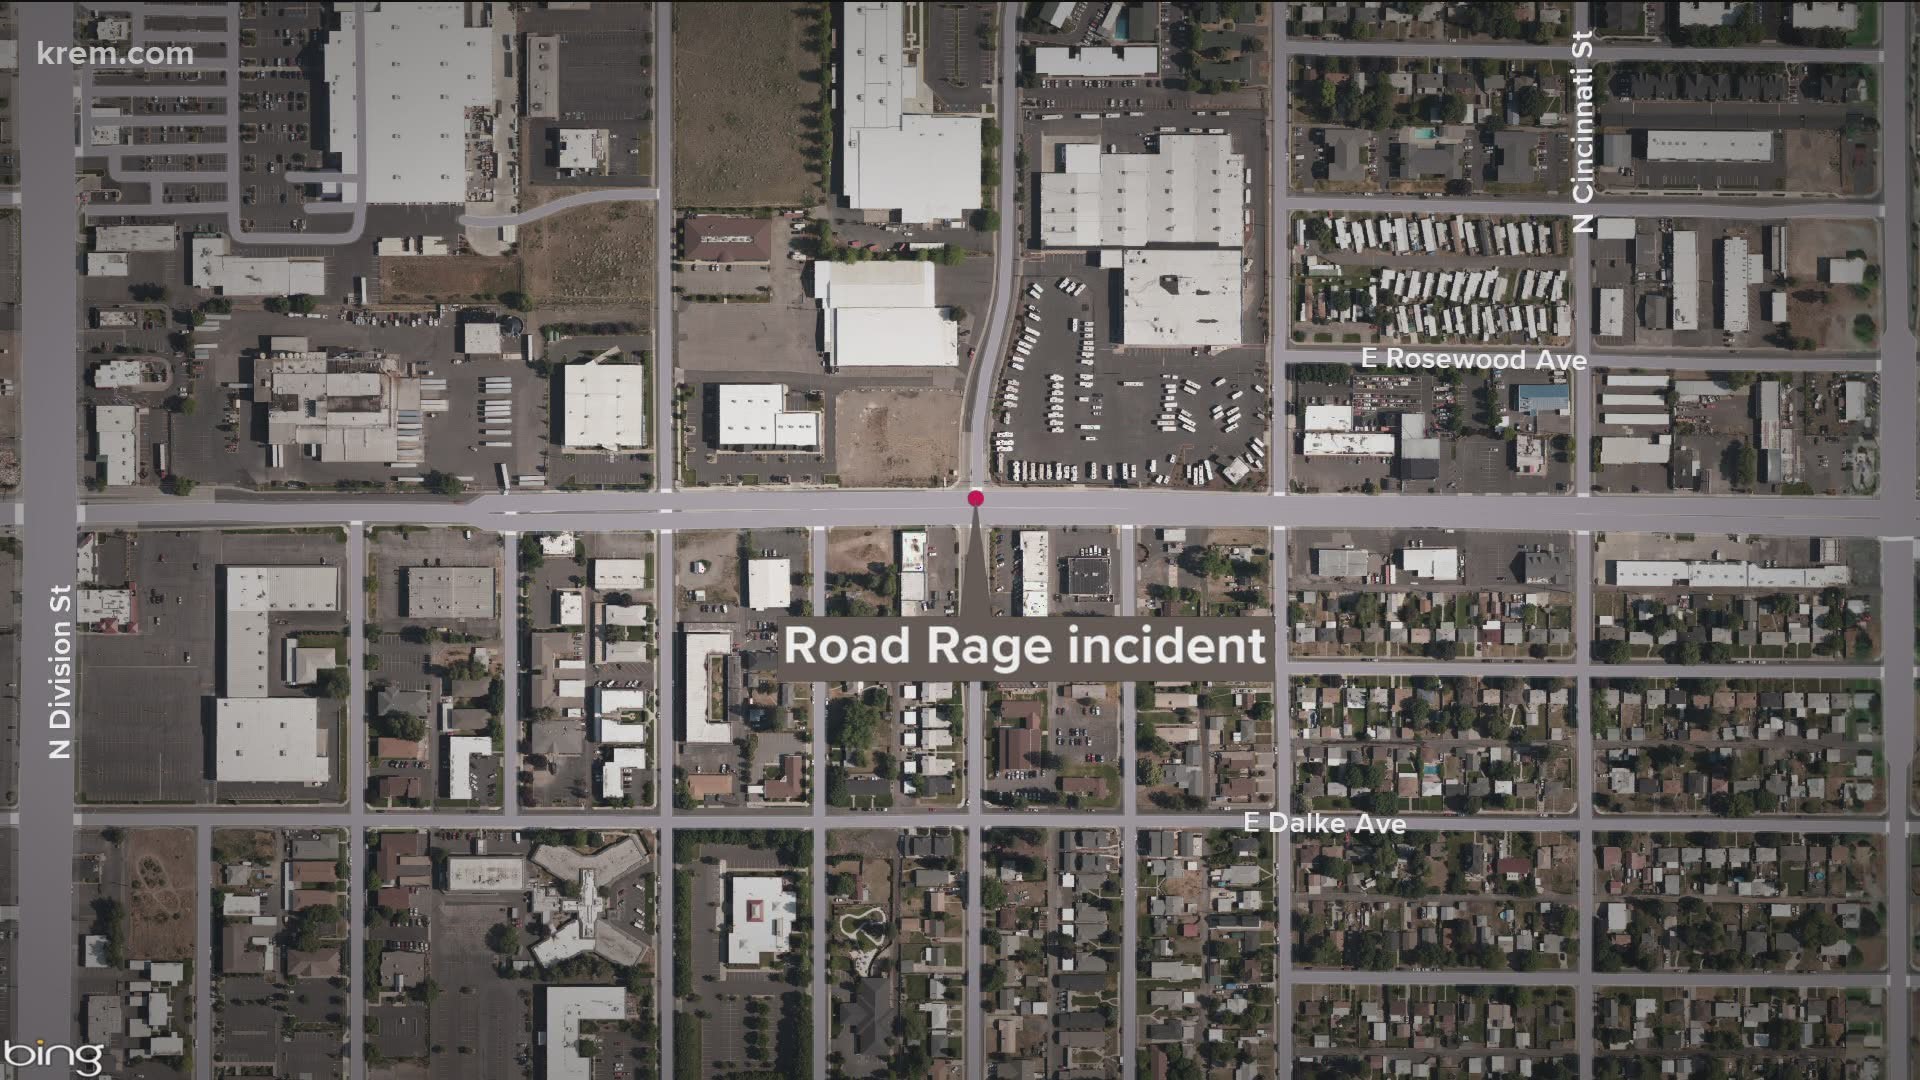 Major Crimes detectives determined that the two parties did not know each other and this was a "tragic case of road rage," Spokane police said.o